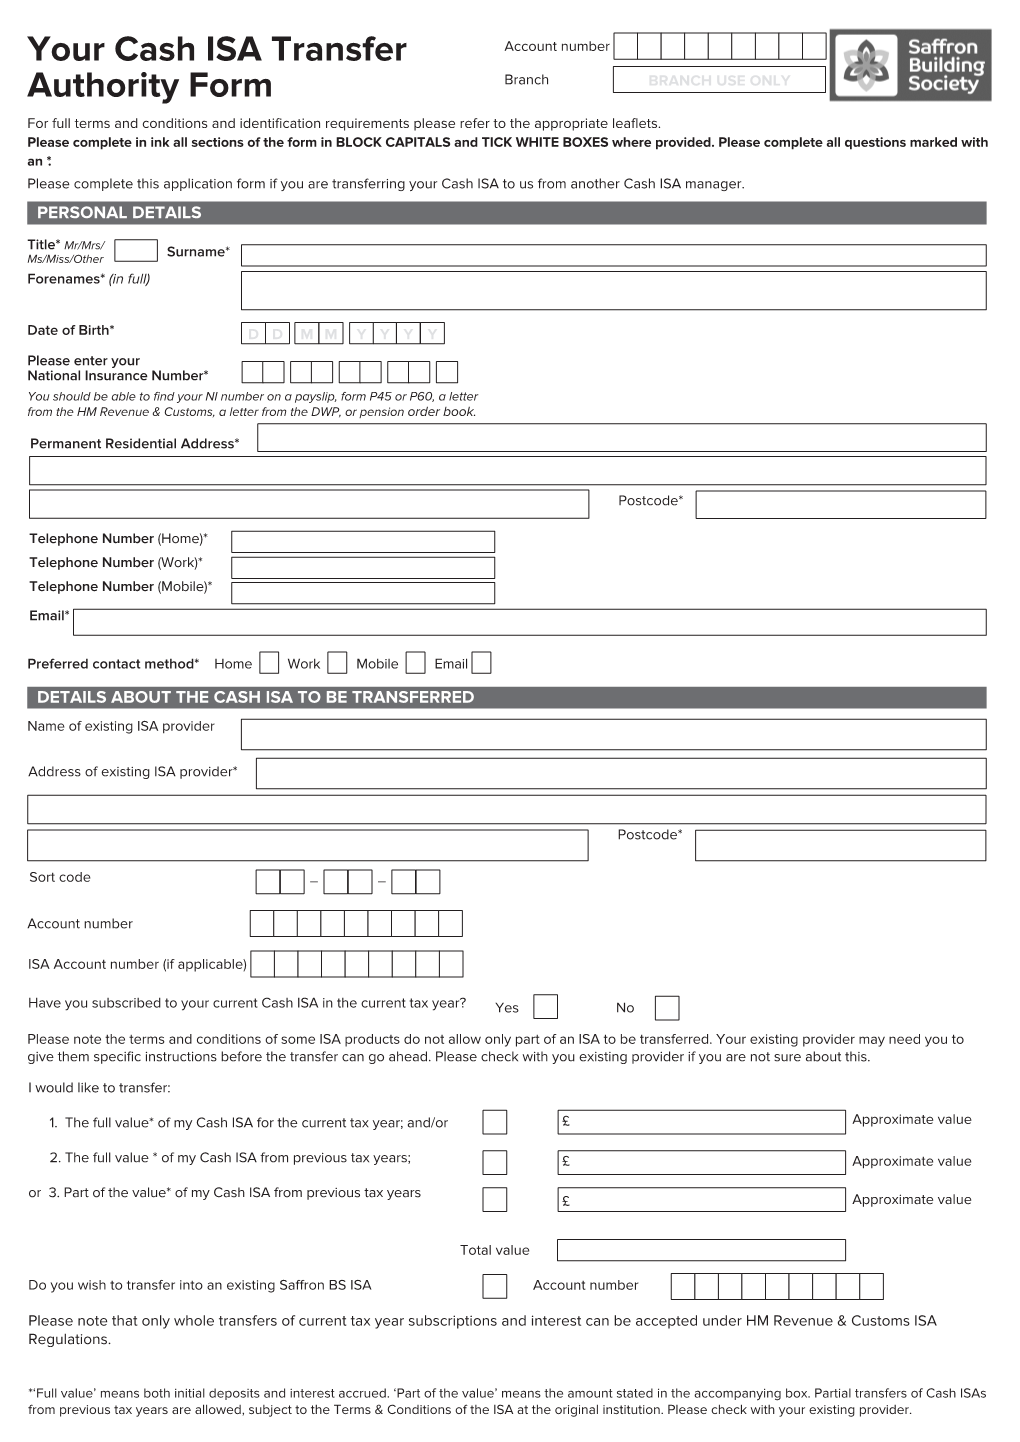 Your Cash ISA Transfer Authority Form